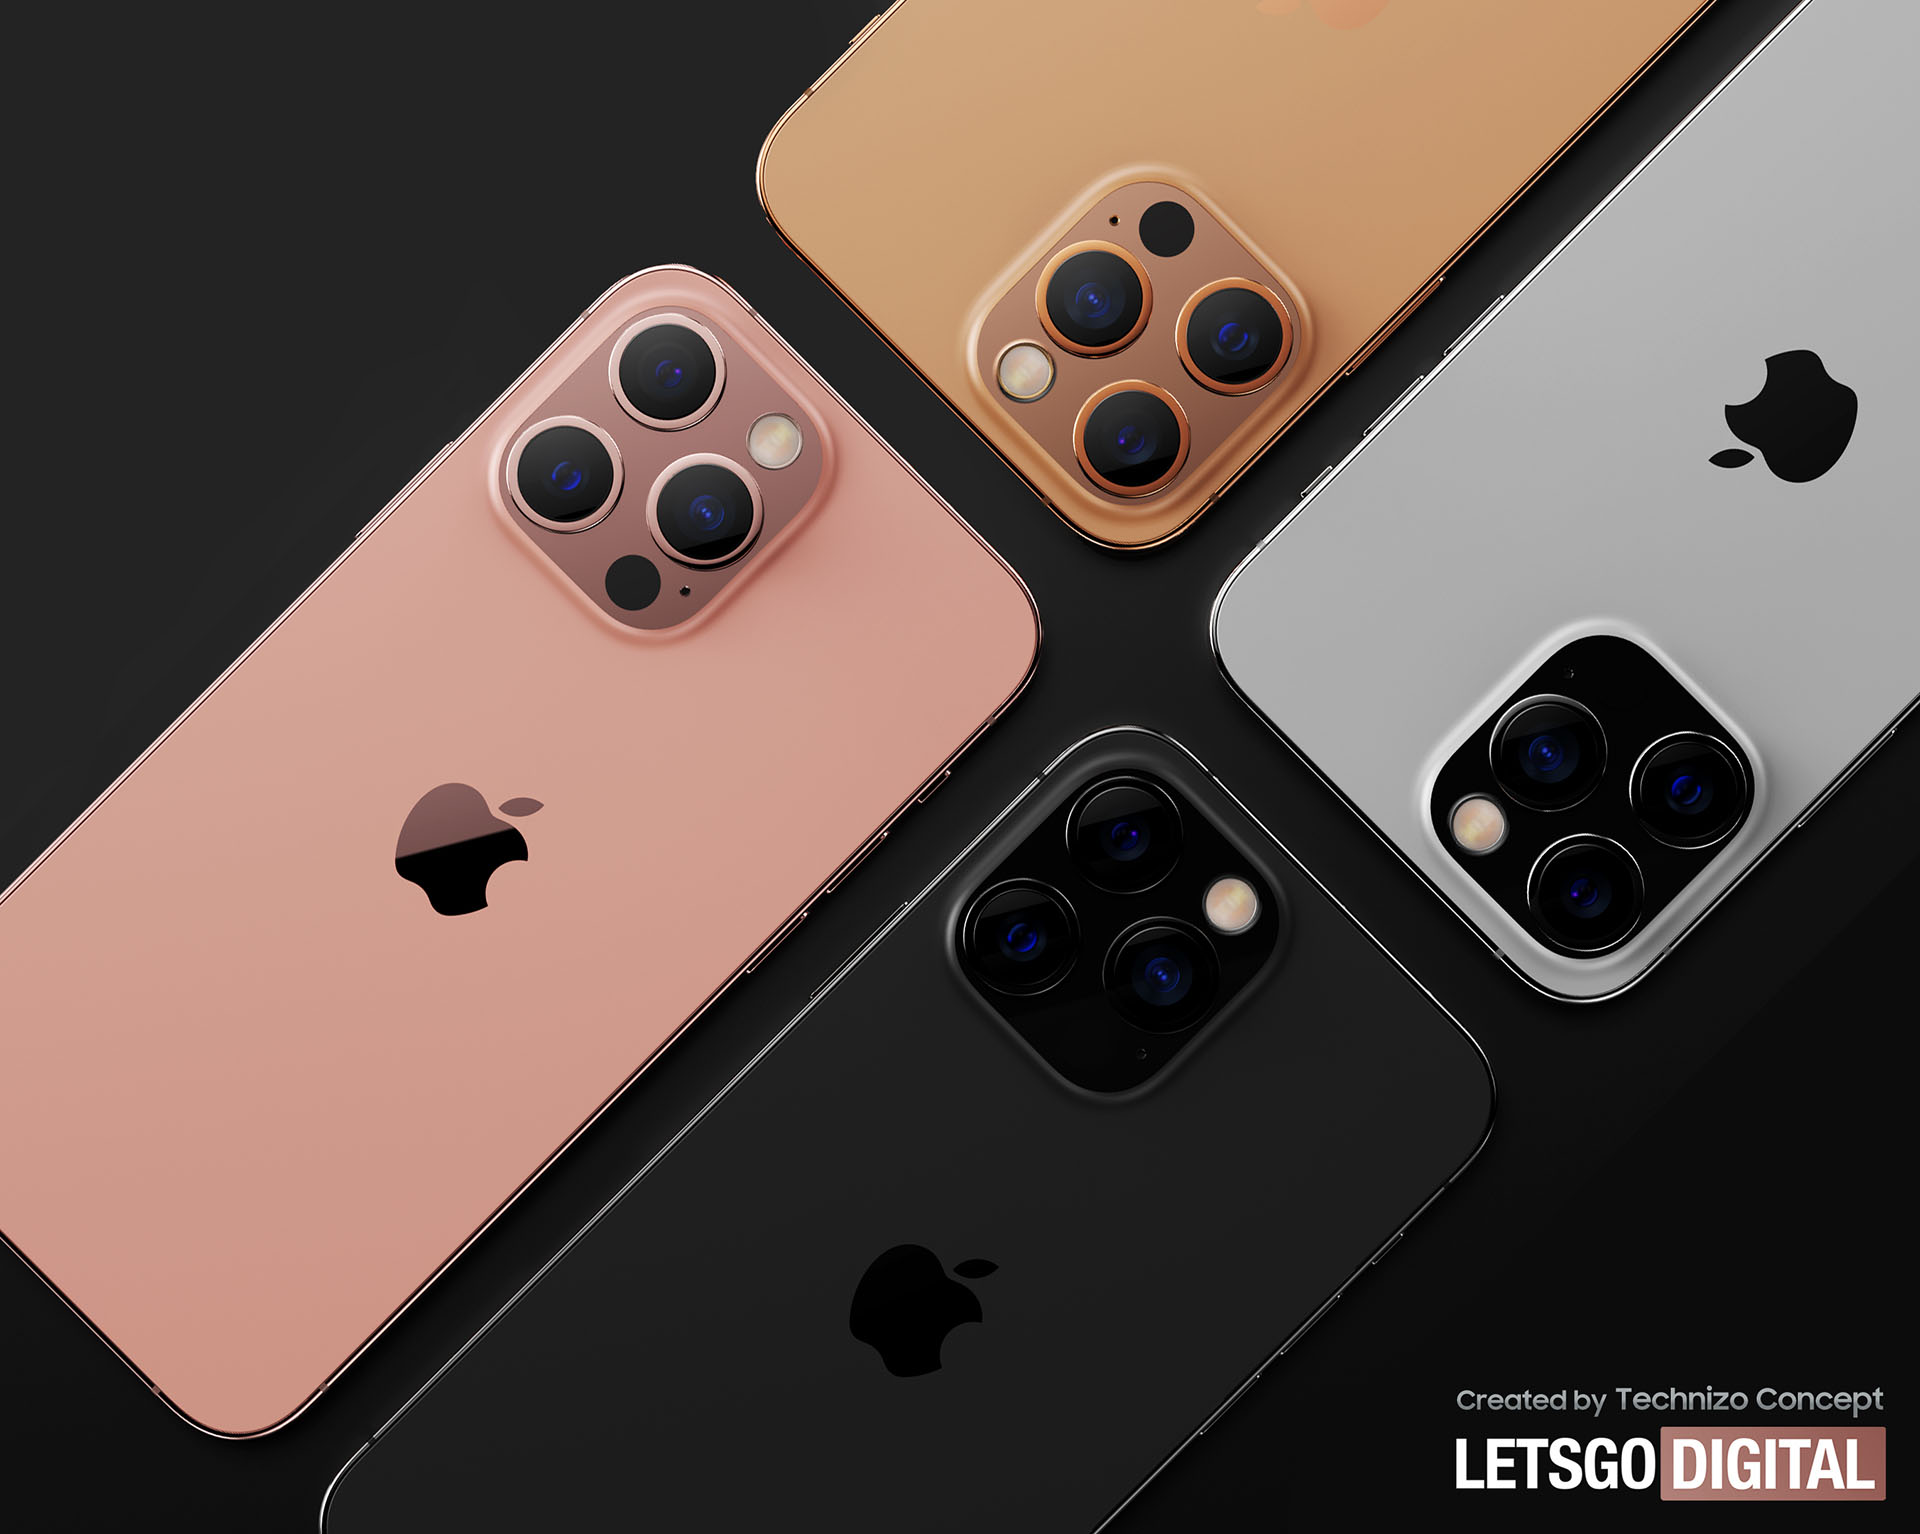 Take A Look At The Iphone 13 Pro Max At Sunset Gold And Rose Gold Wylsacom